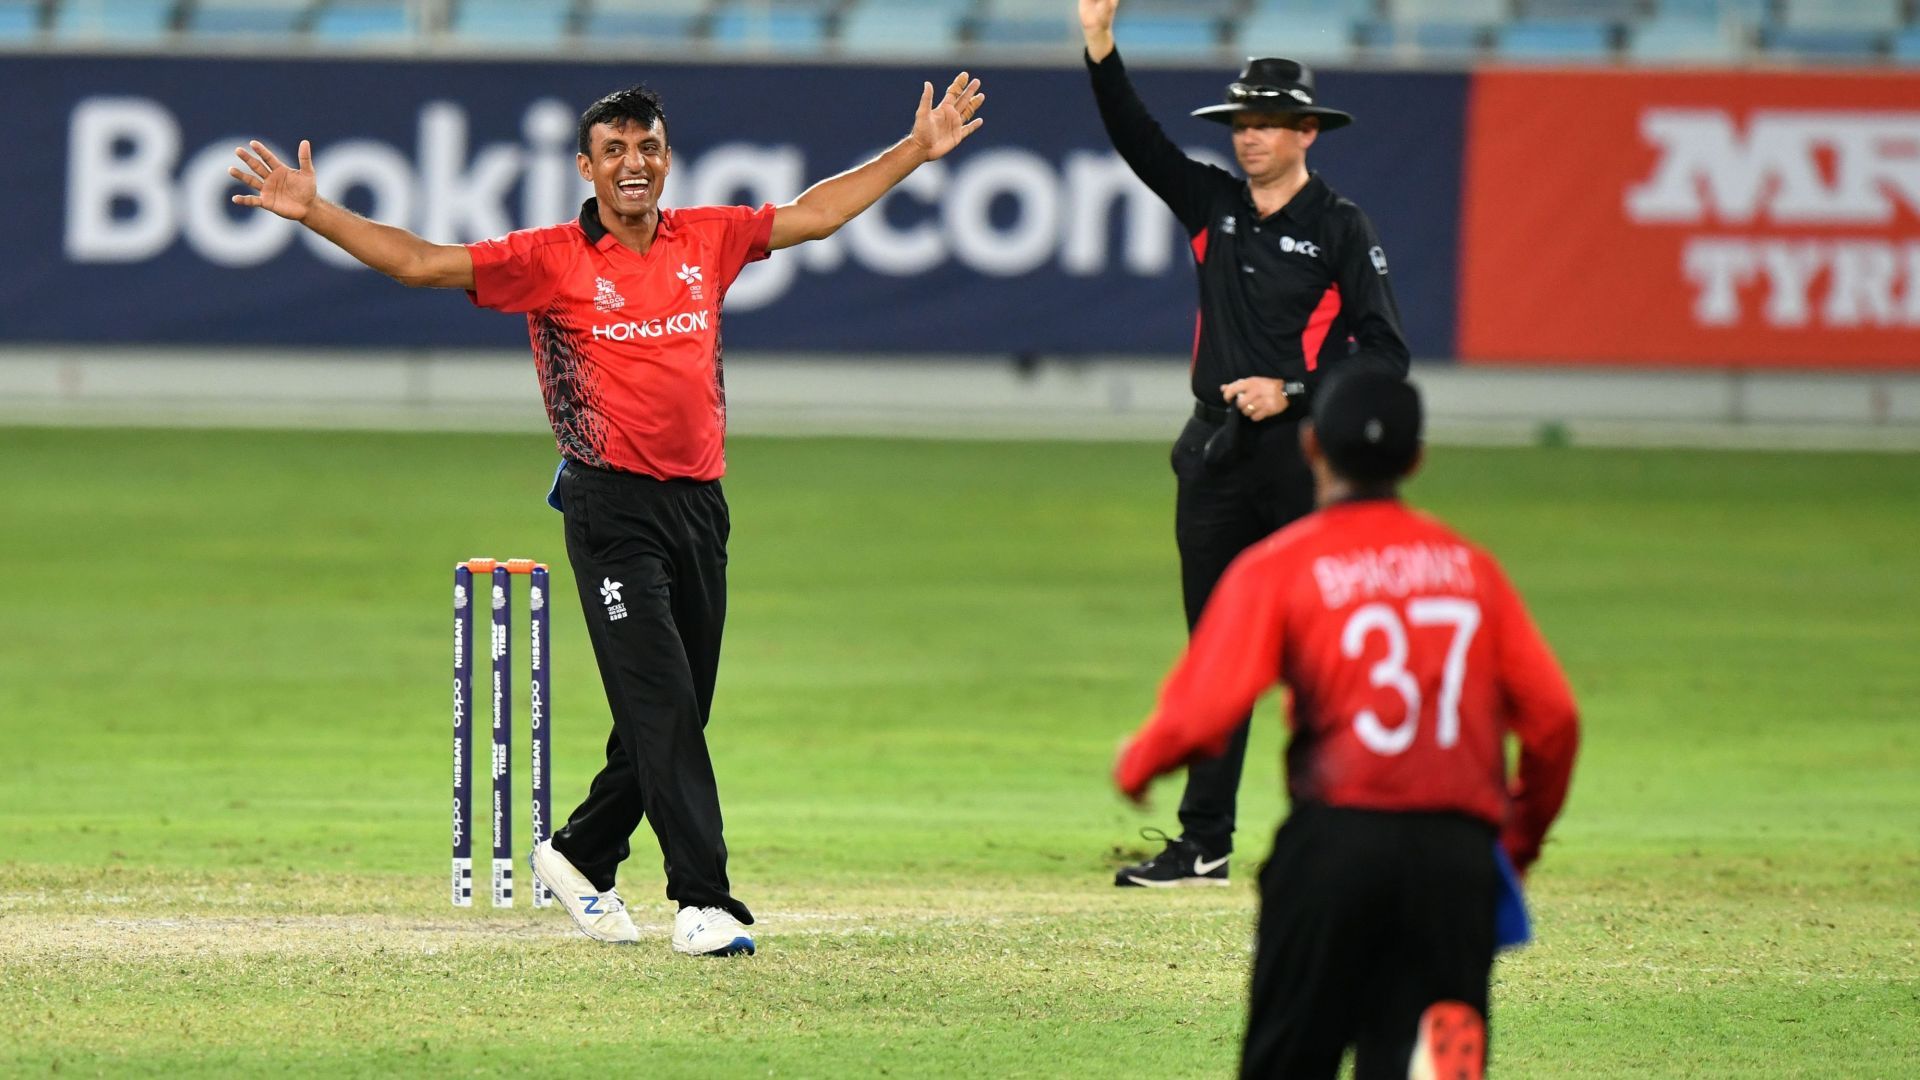 Hong Kong can cause a real upset against Pakistan in Asia Cup